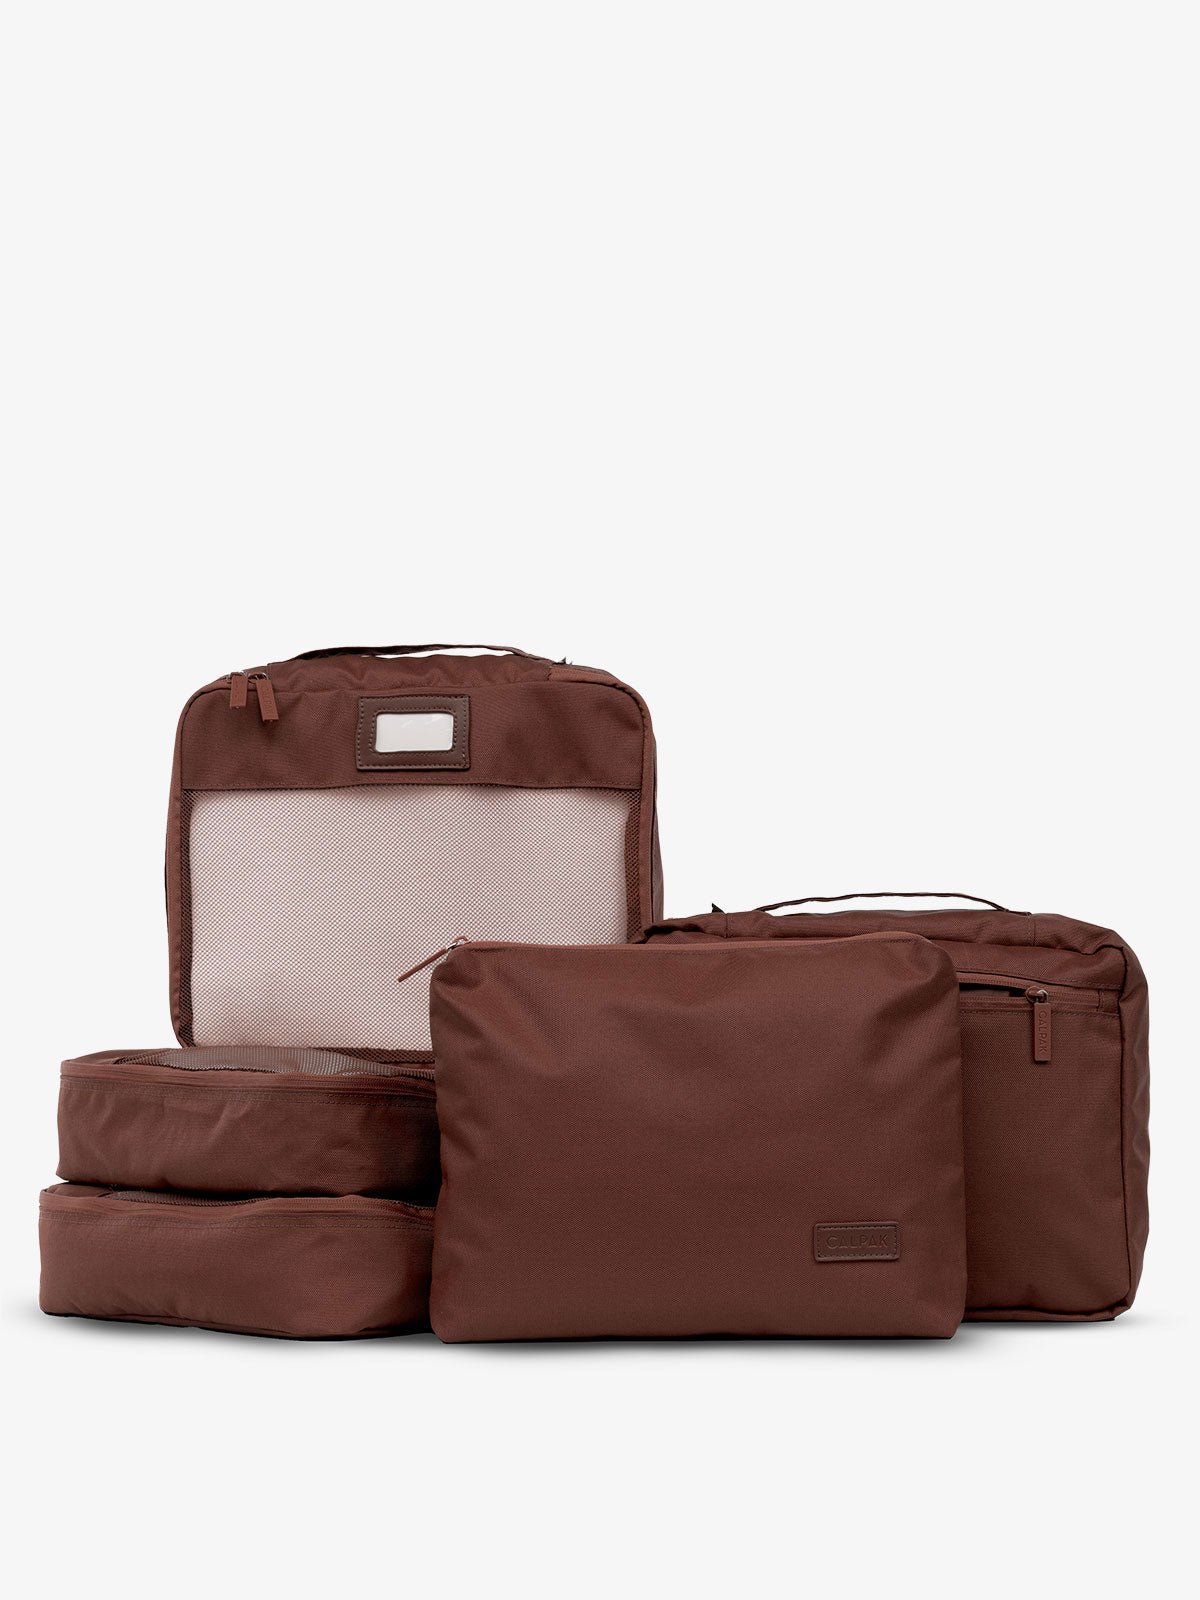 CALPAK 5 piece set packing cubes for travel with labels and top handles in brown walnut